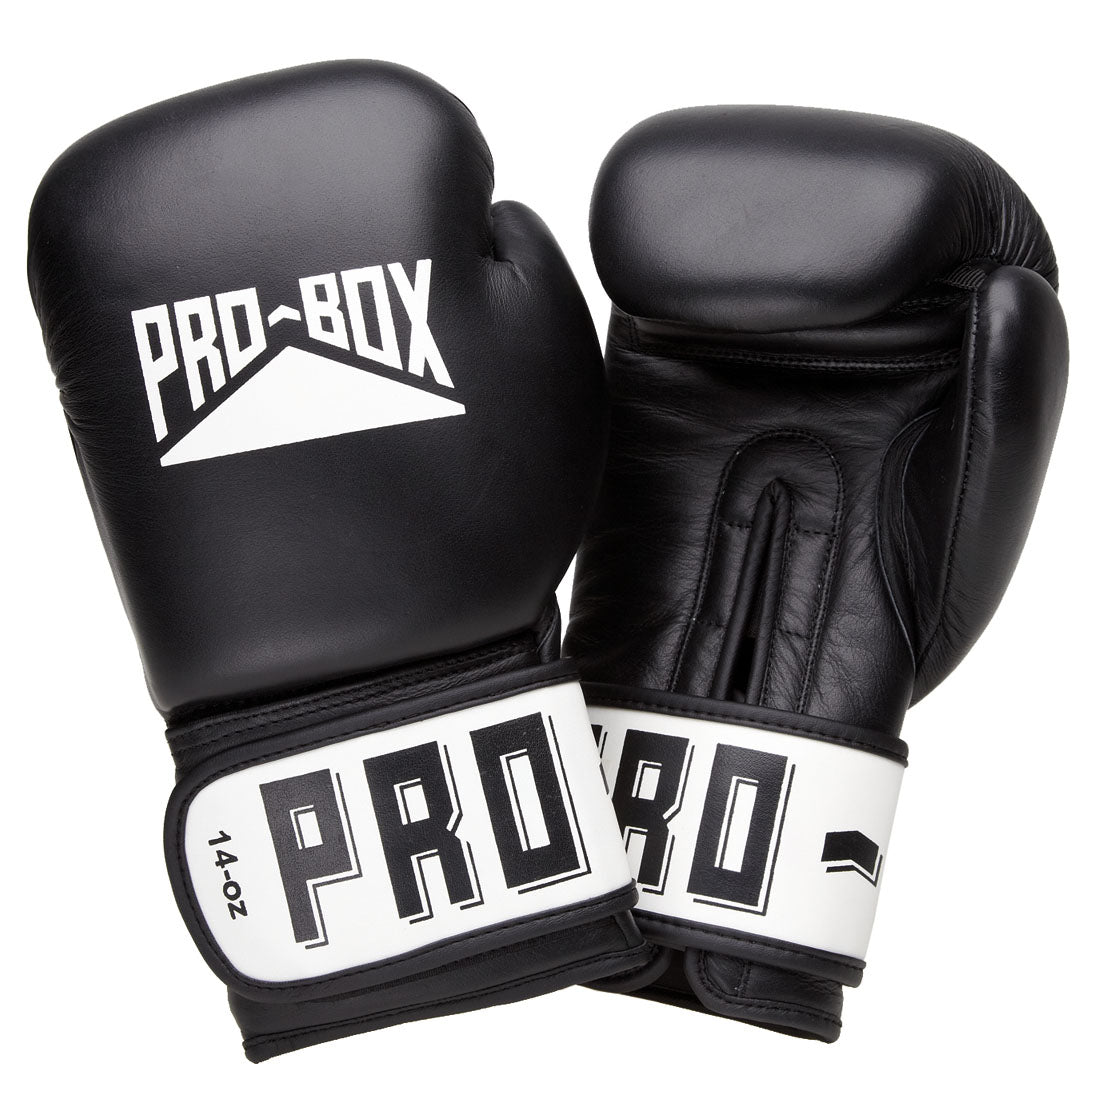 Image of Pro-Box Leather Club Essentials Sparring Gloves